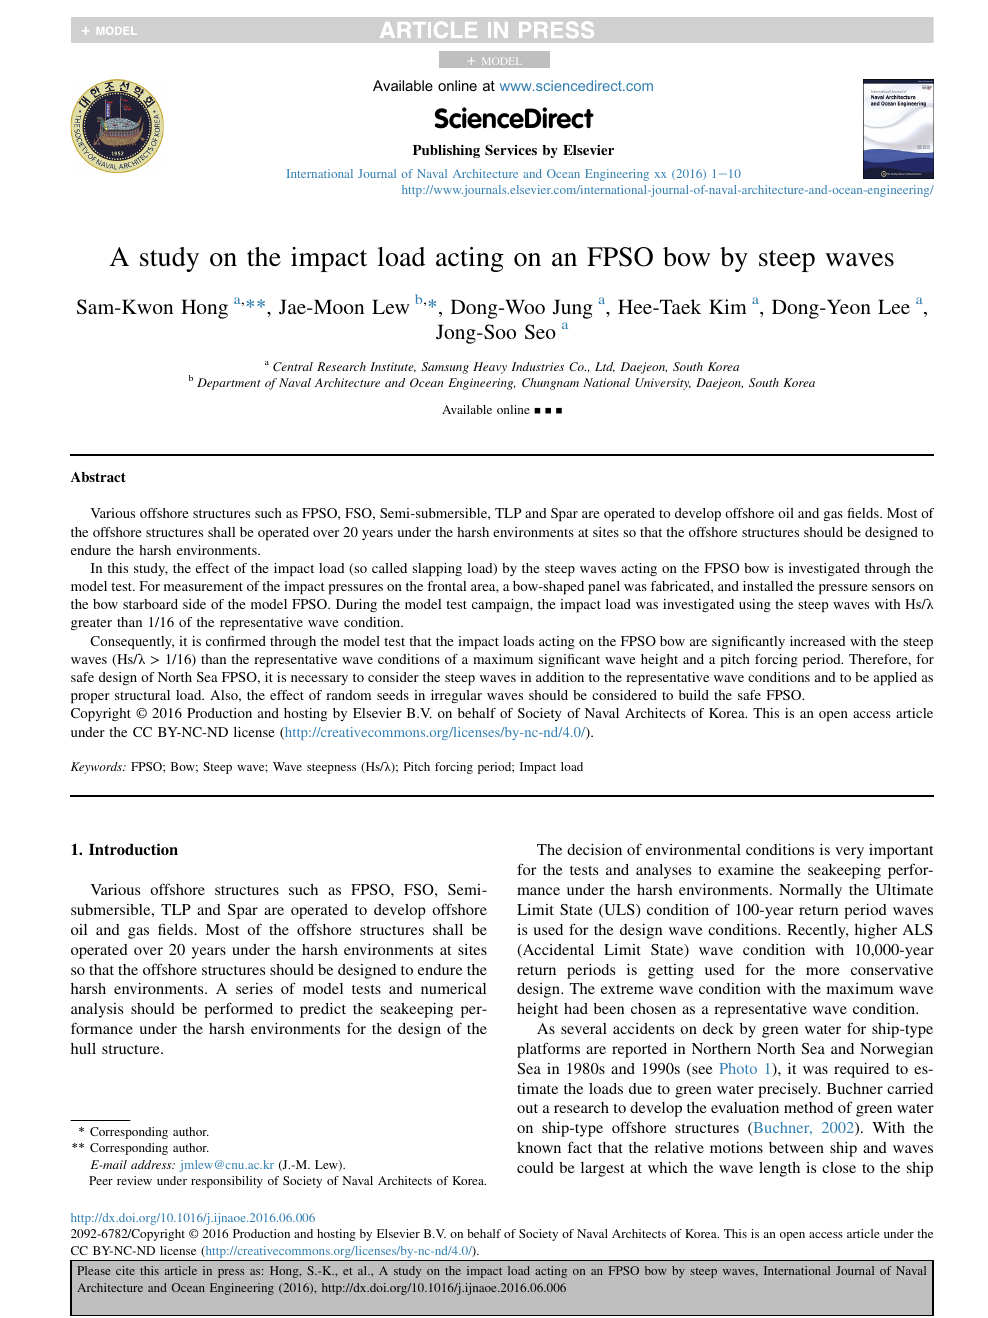 A Study On The Impact Load Acting On An Fpso Bow By Steep Waves Topic Of Research Paper In Earth And Related Environmental Sciences Download Scholarly Article Pdf And Read For